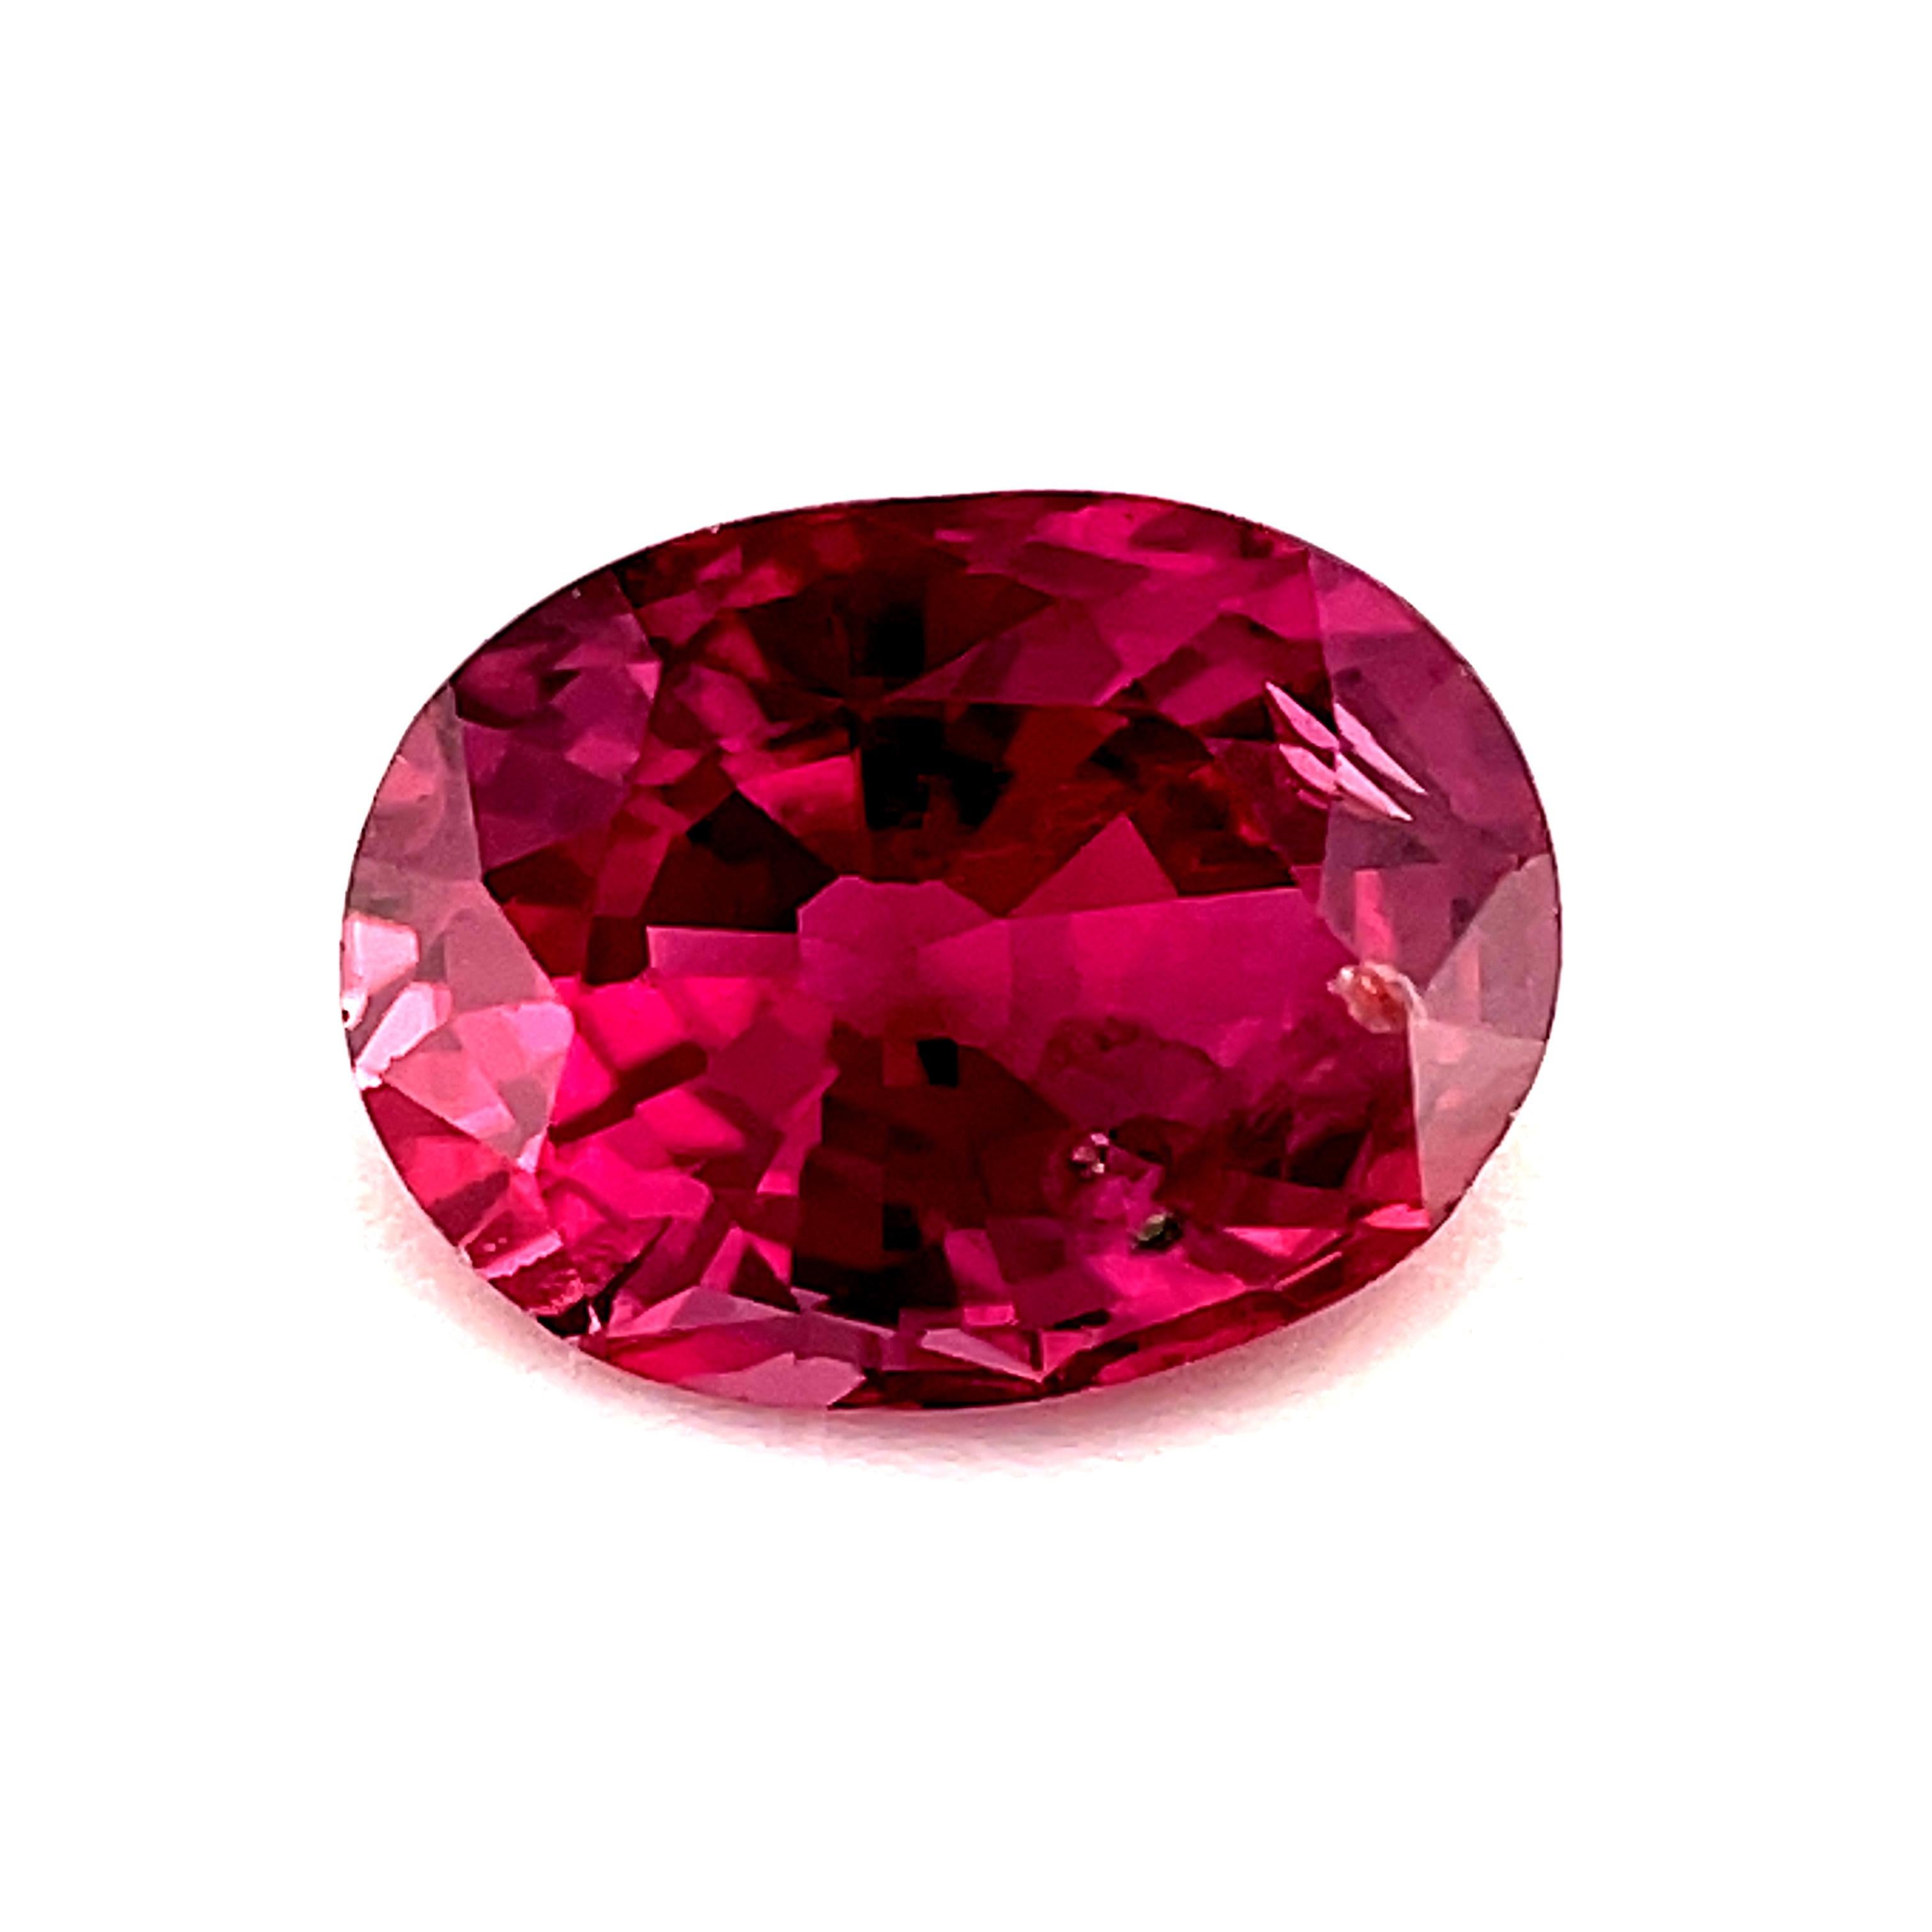 If you are looking for a bright pinkish fancy sapphire with sparkling raspberry highlights, this is your gem! Weighing .96 carats, it is just shy of a full carat, has gorgeous color and is such a brilliant gemstone! This sapphire measures 6.52 x